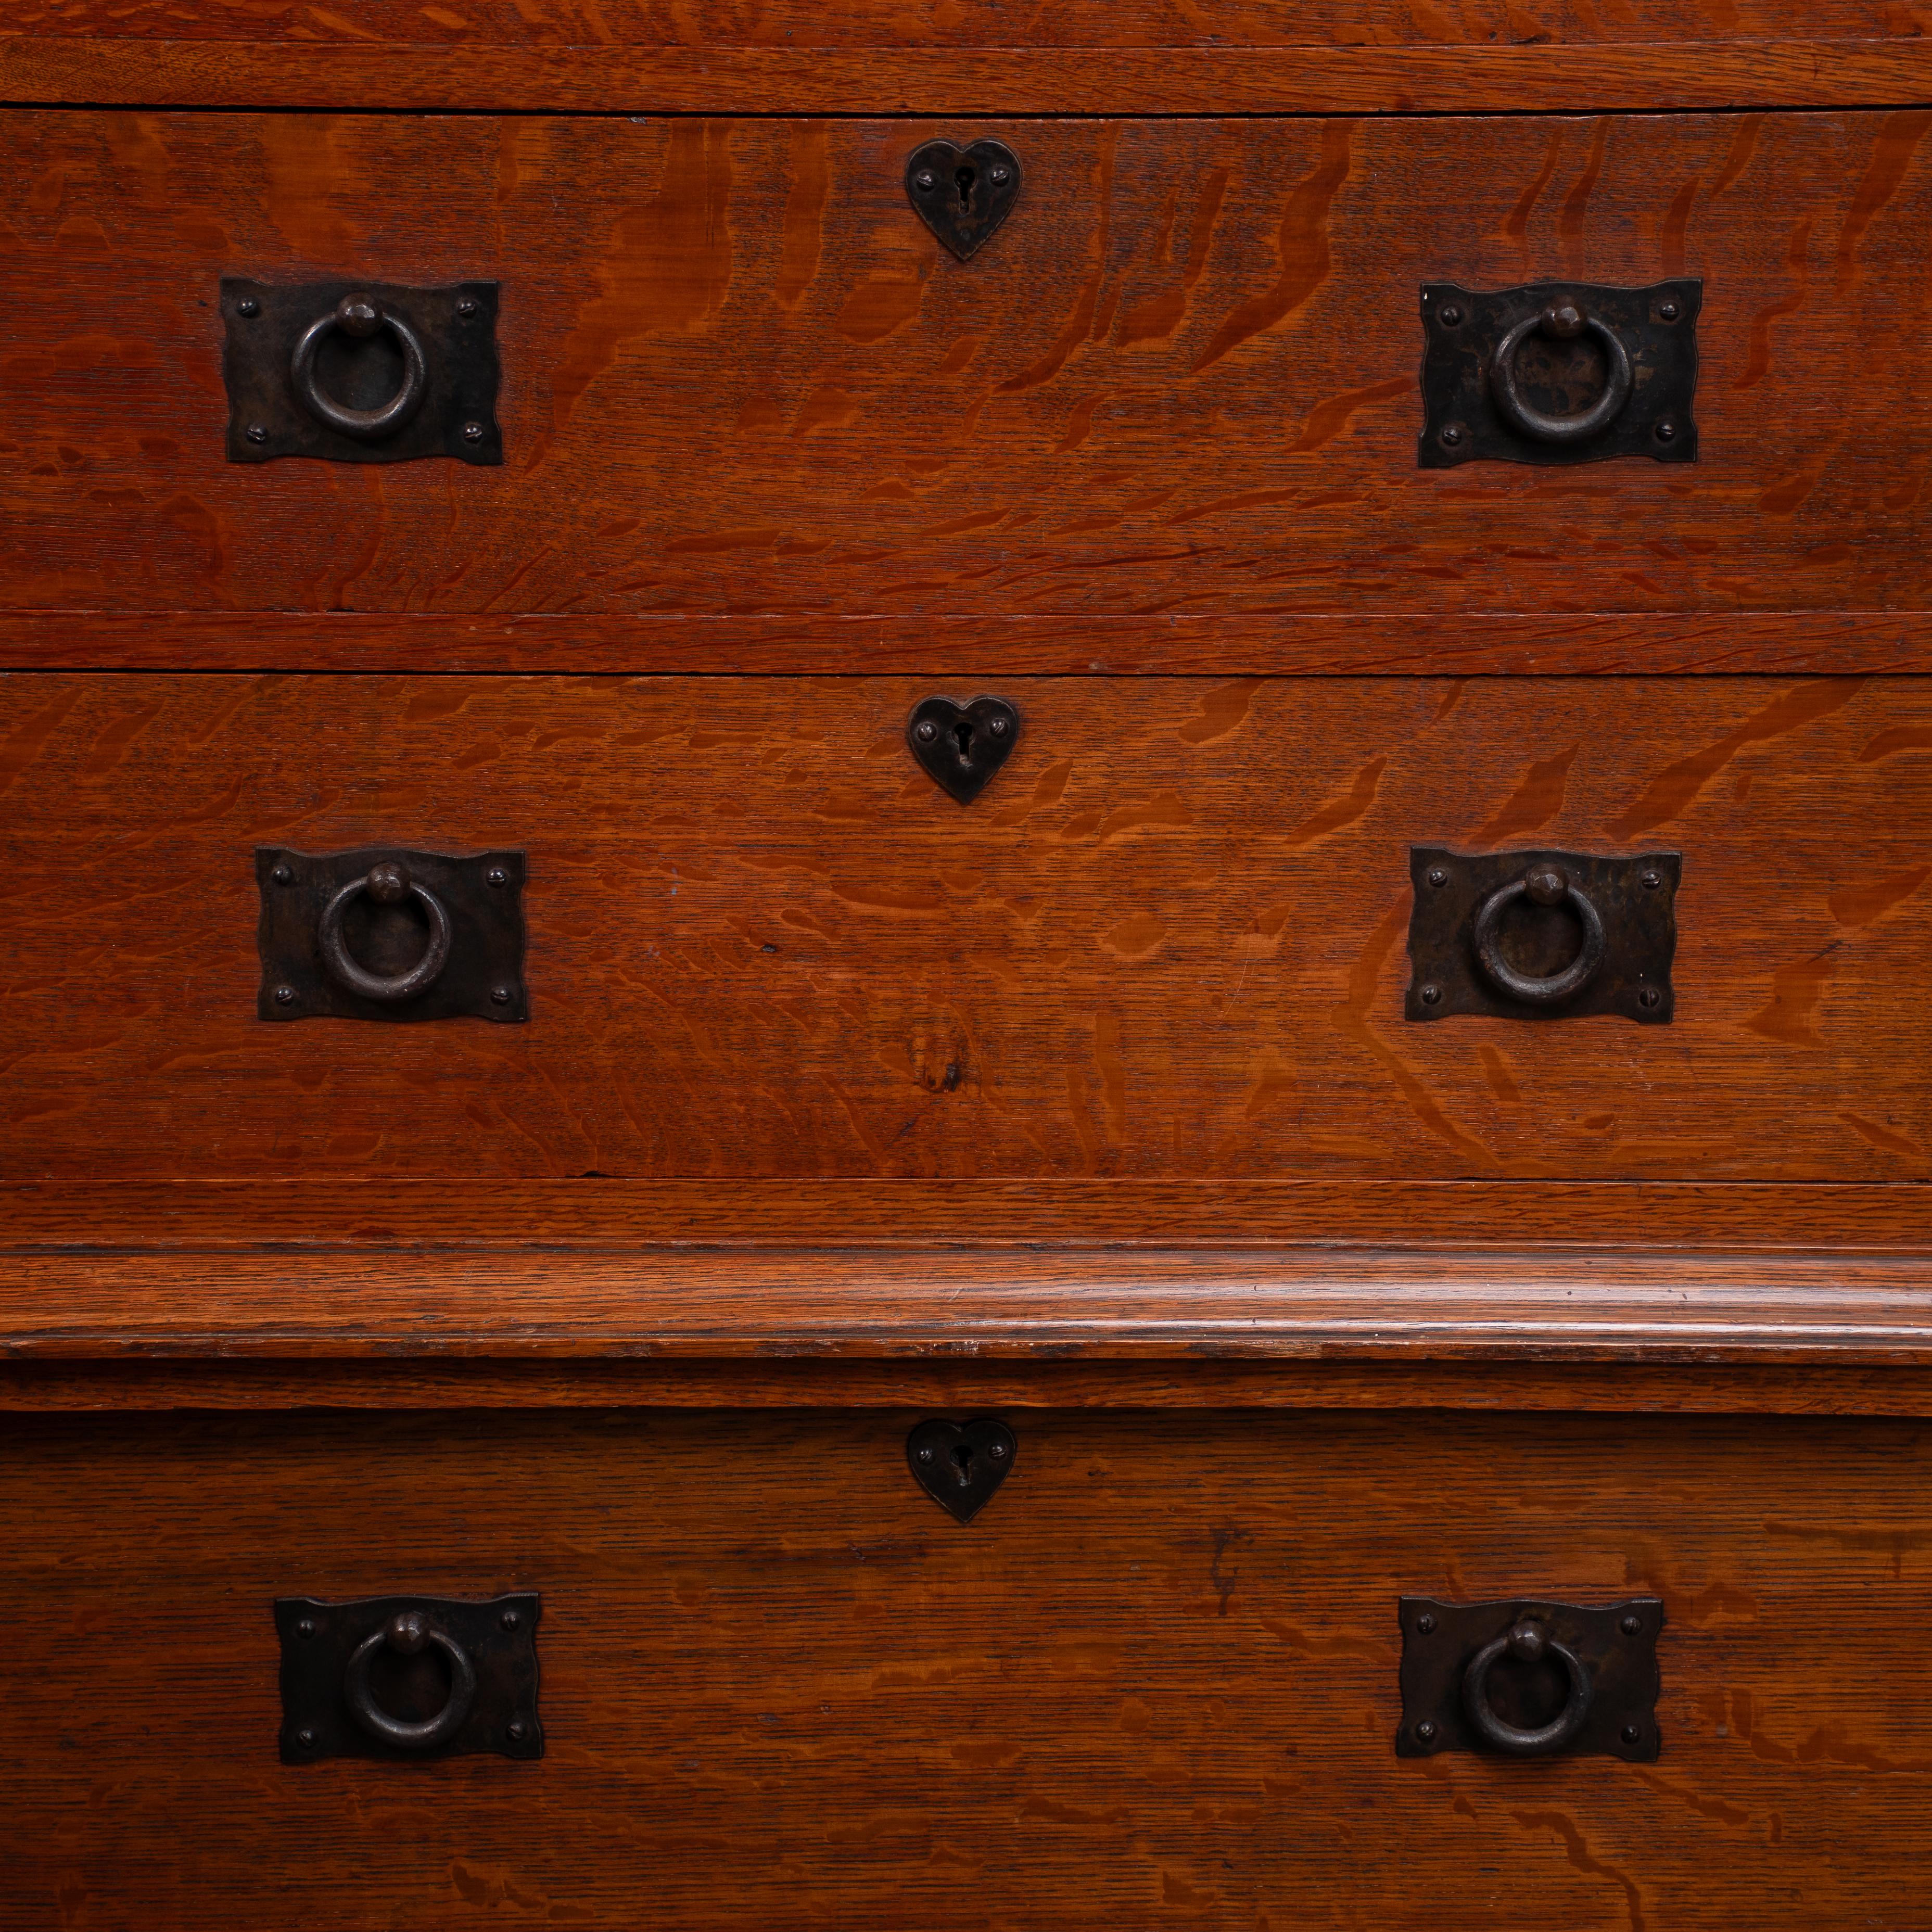 English Ambrose Heal A Rare Mansfield Oak Chest of Drawers With Iron Heart Escutcheons For Sale